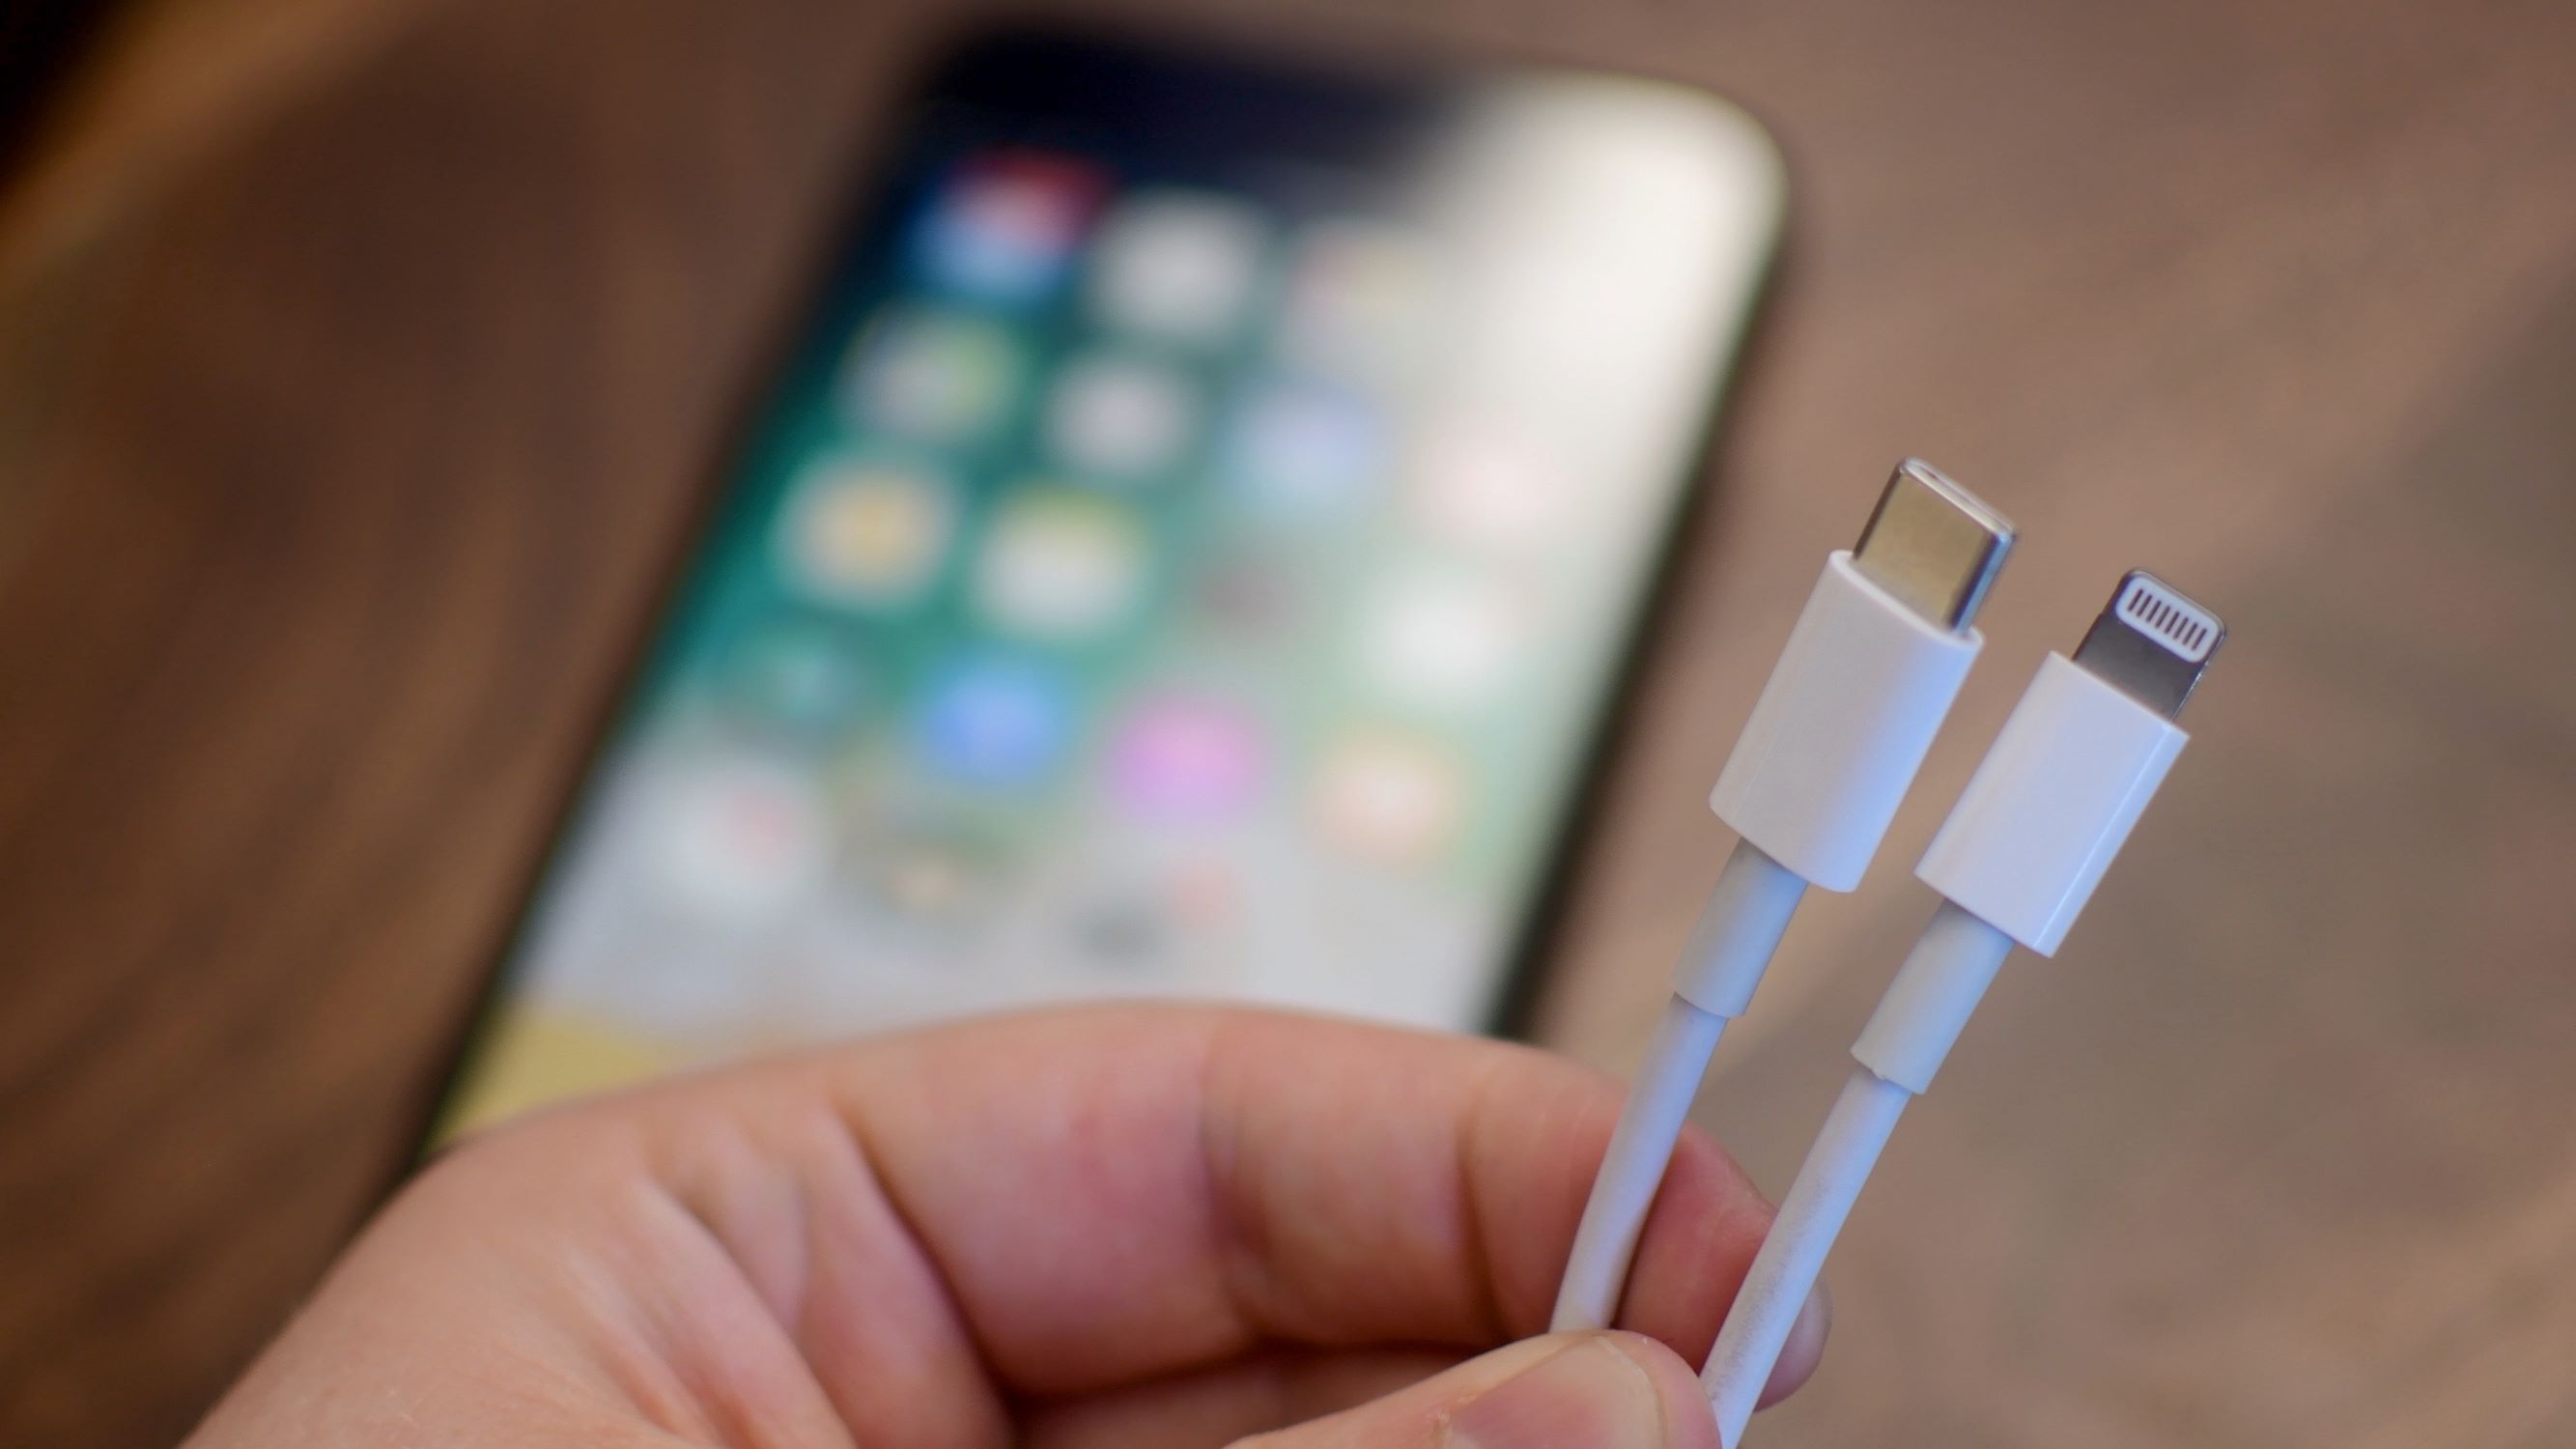 apple-abandons-lightning-connector-in-favor-of-usb-c-after-11-years